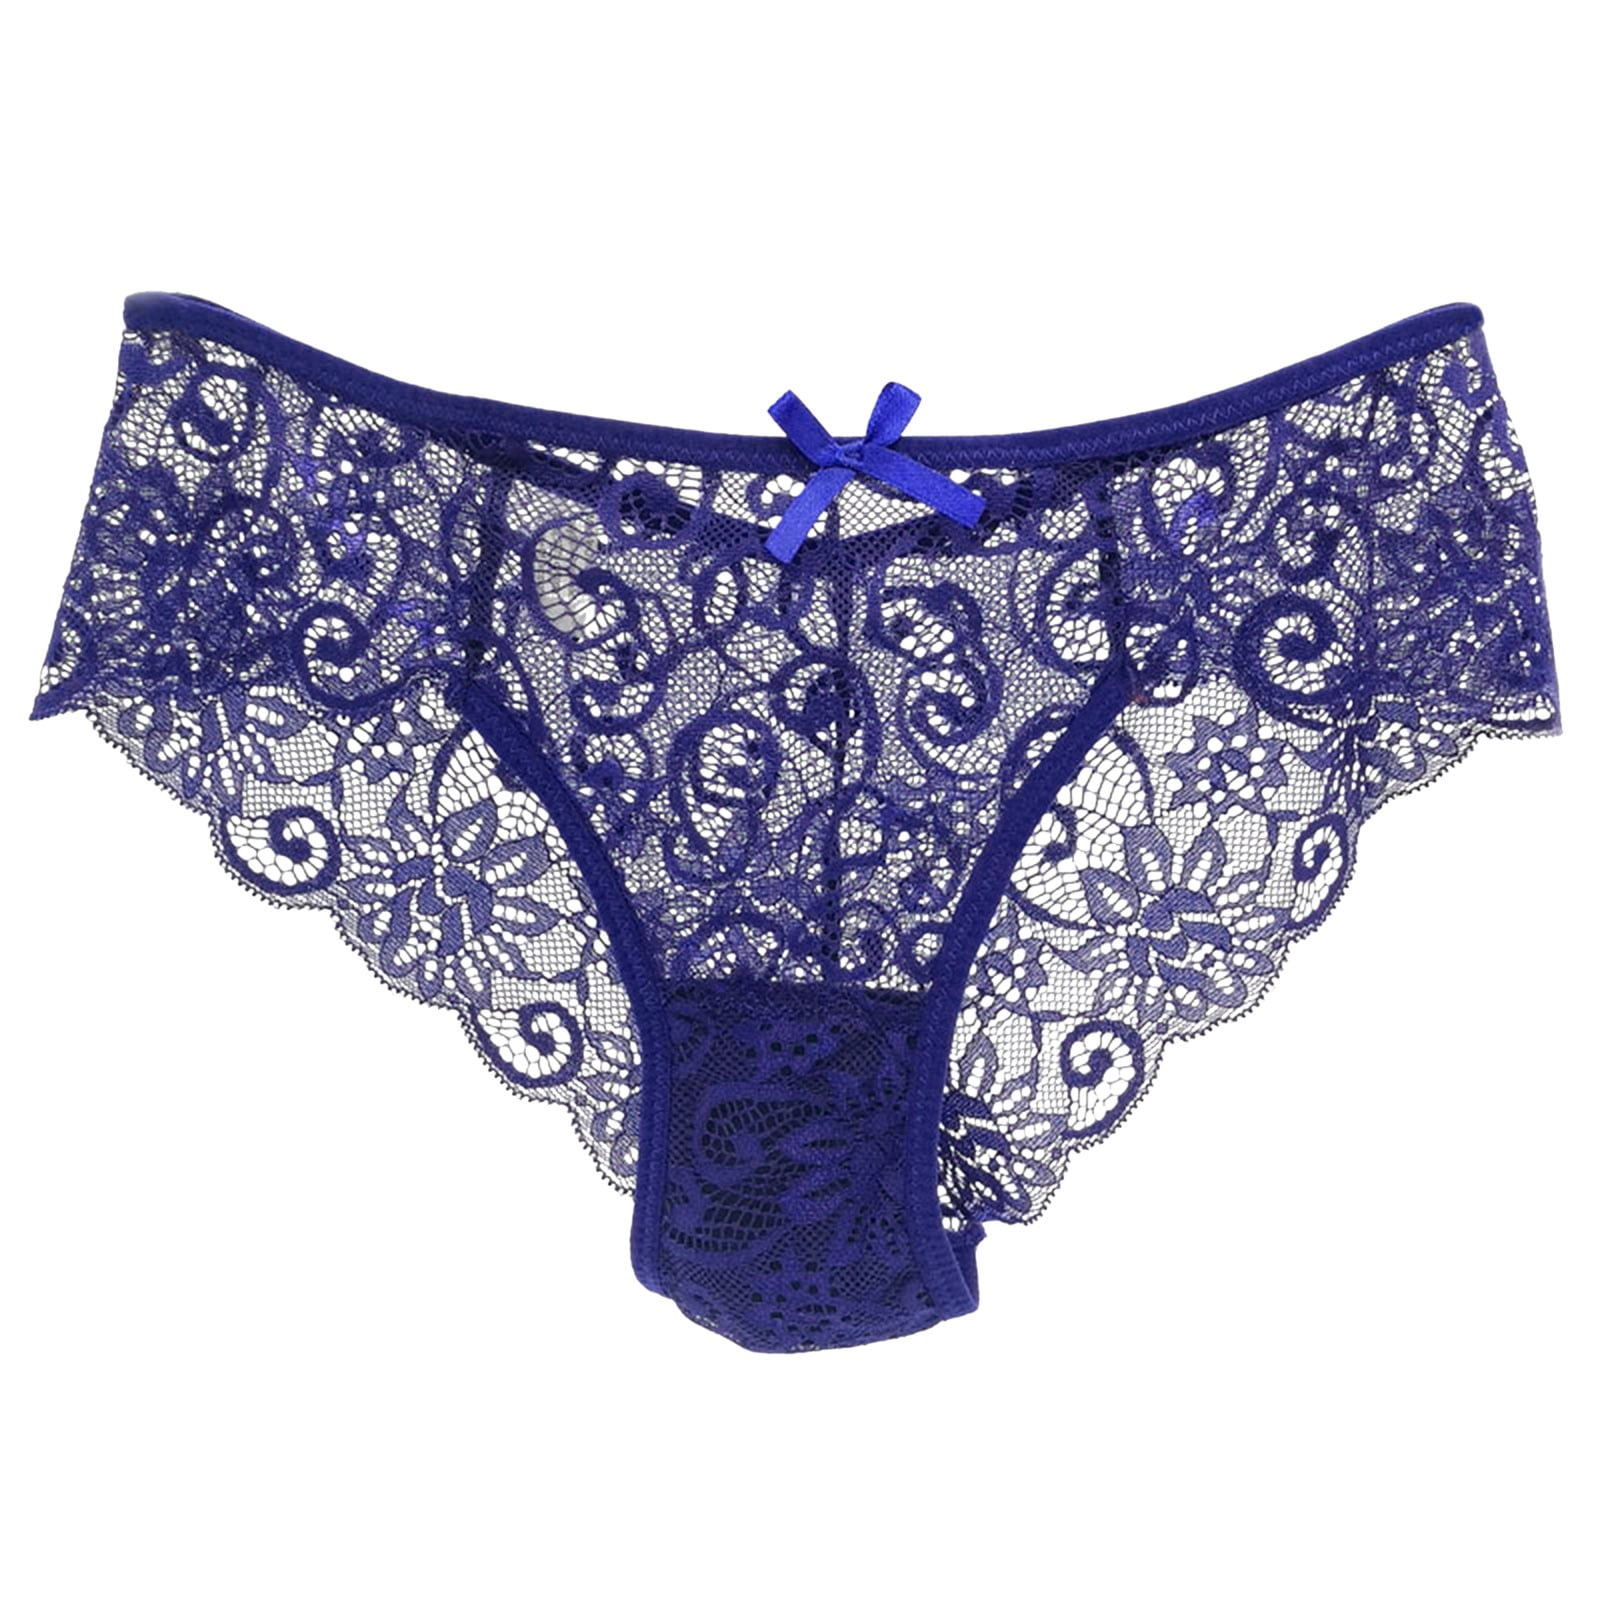 309 Blue Lace Panties Women Isolated Stock Photos - Free & Royalty